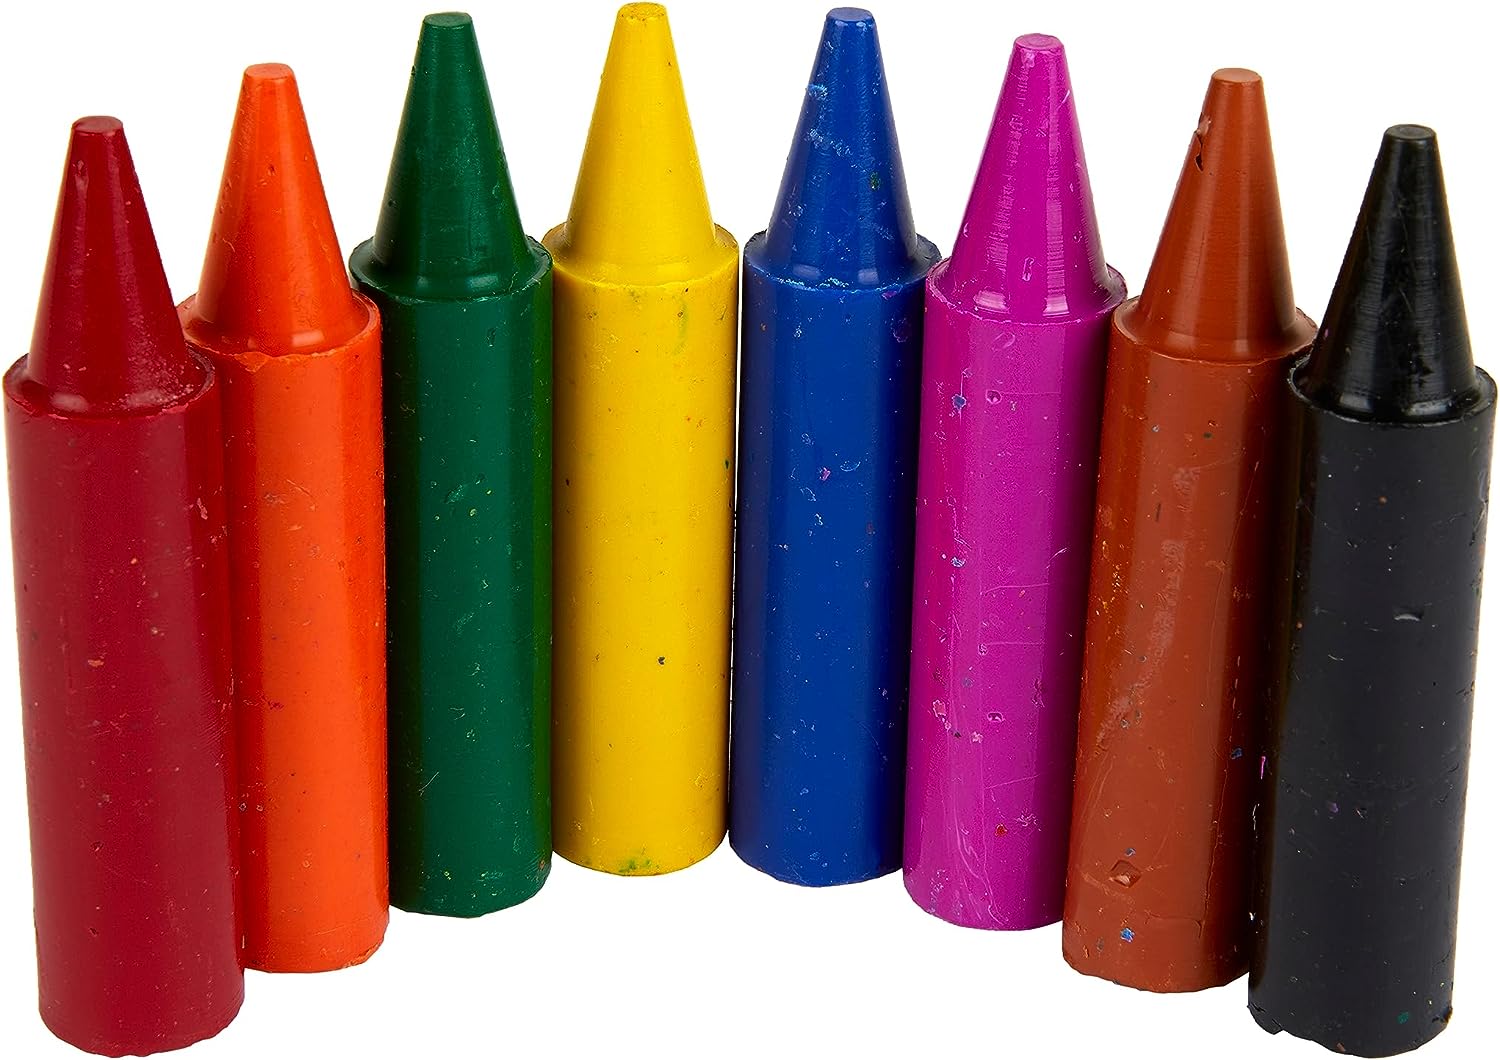 CRAYOLA MyFirst Jumbo Crayons - Assorted Colours (Pack of 8) | Easy-Grip Colouring Crayons Perfect for Toddlers Hands | Ideal for Kids Aged 12+ Months